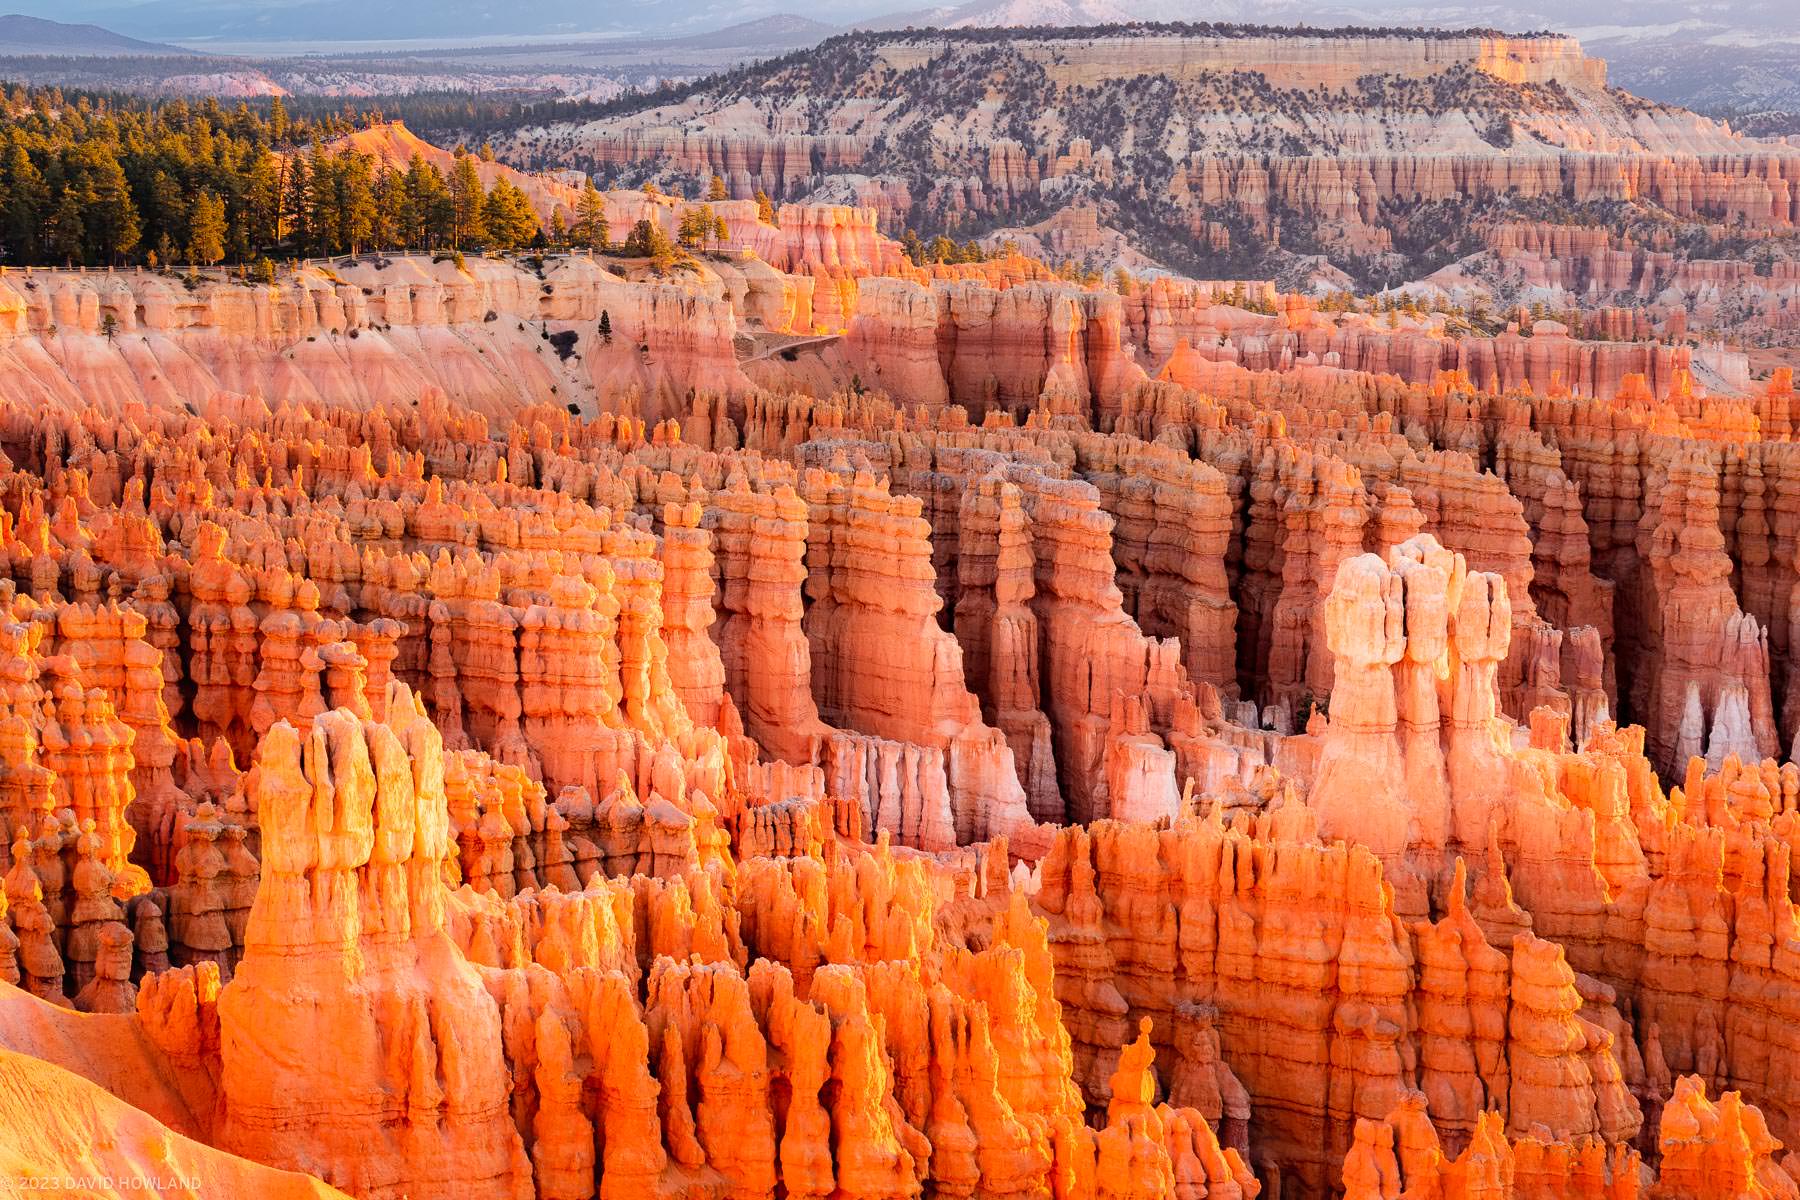 A photo of the hoodoo rock towers at Bryce Canyon National Park lit up bright orange at sunrise